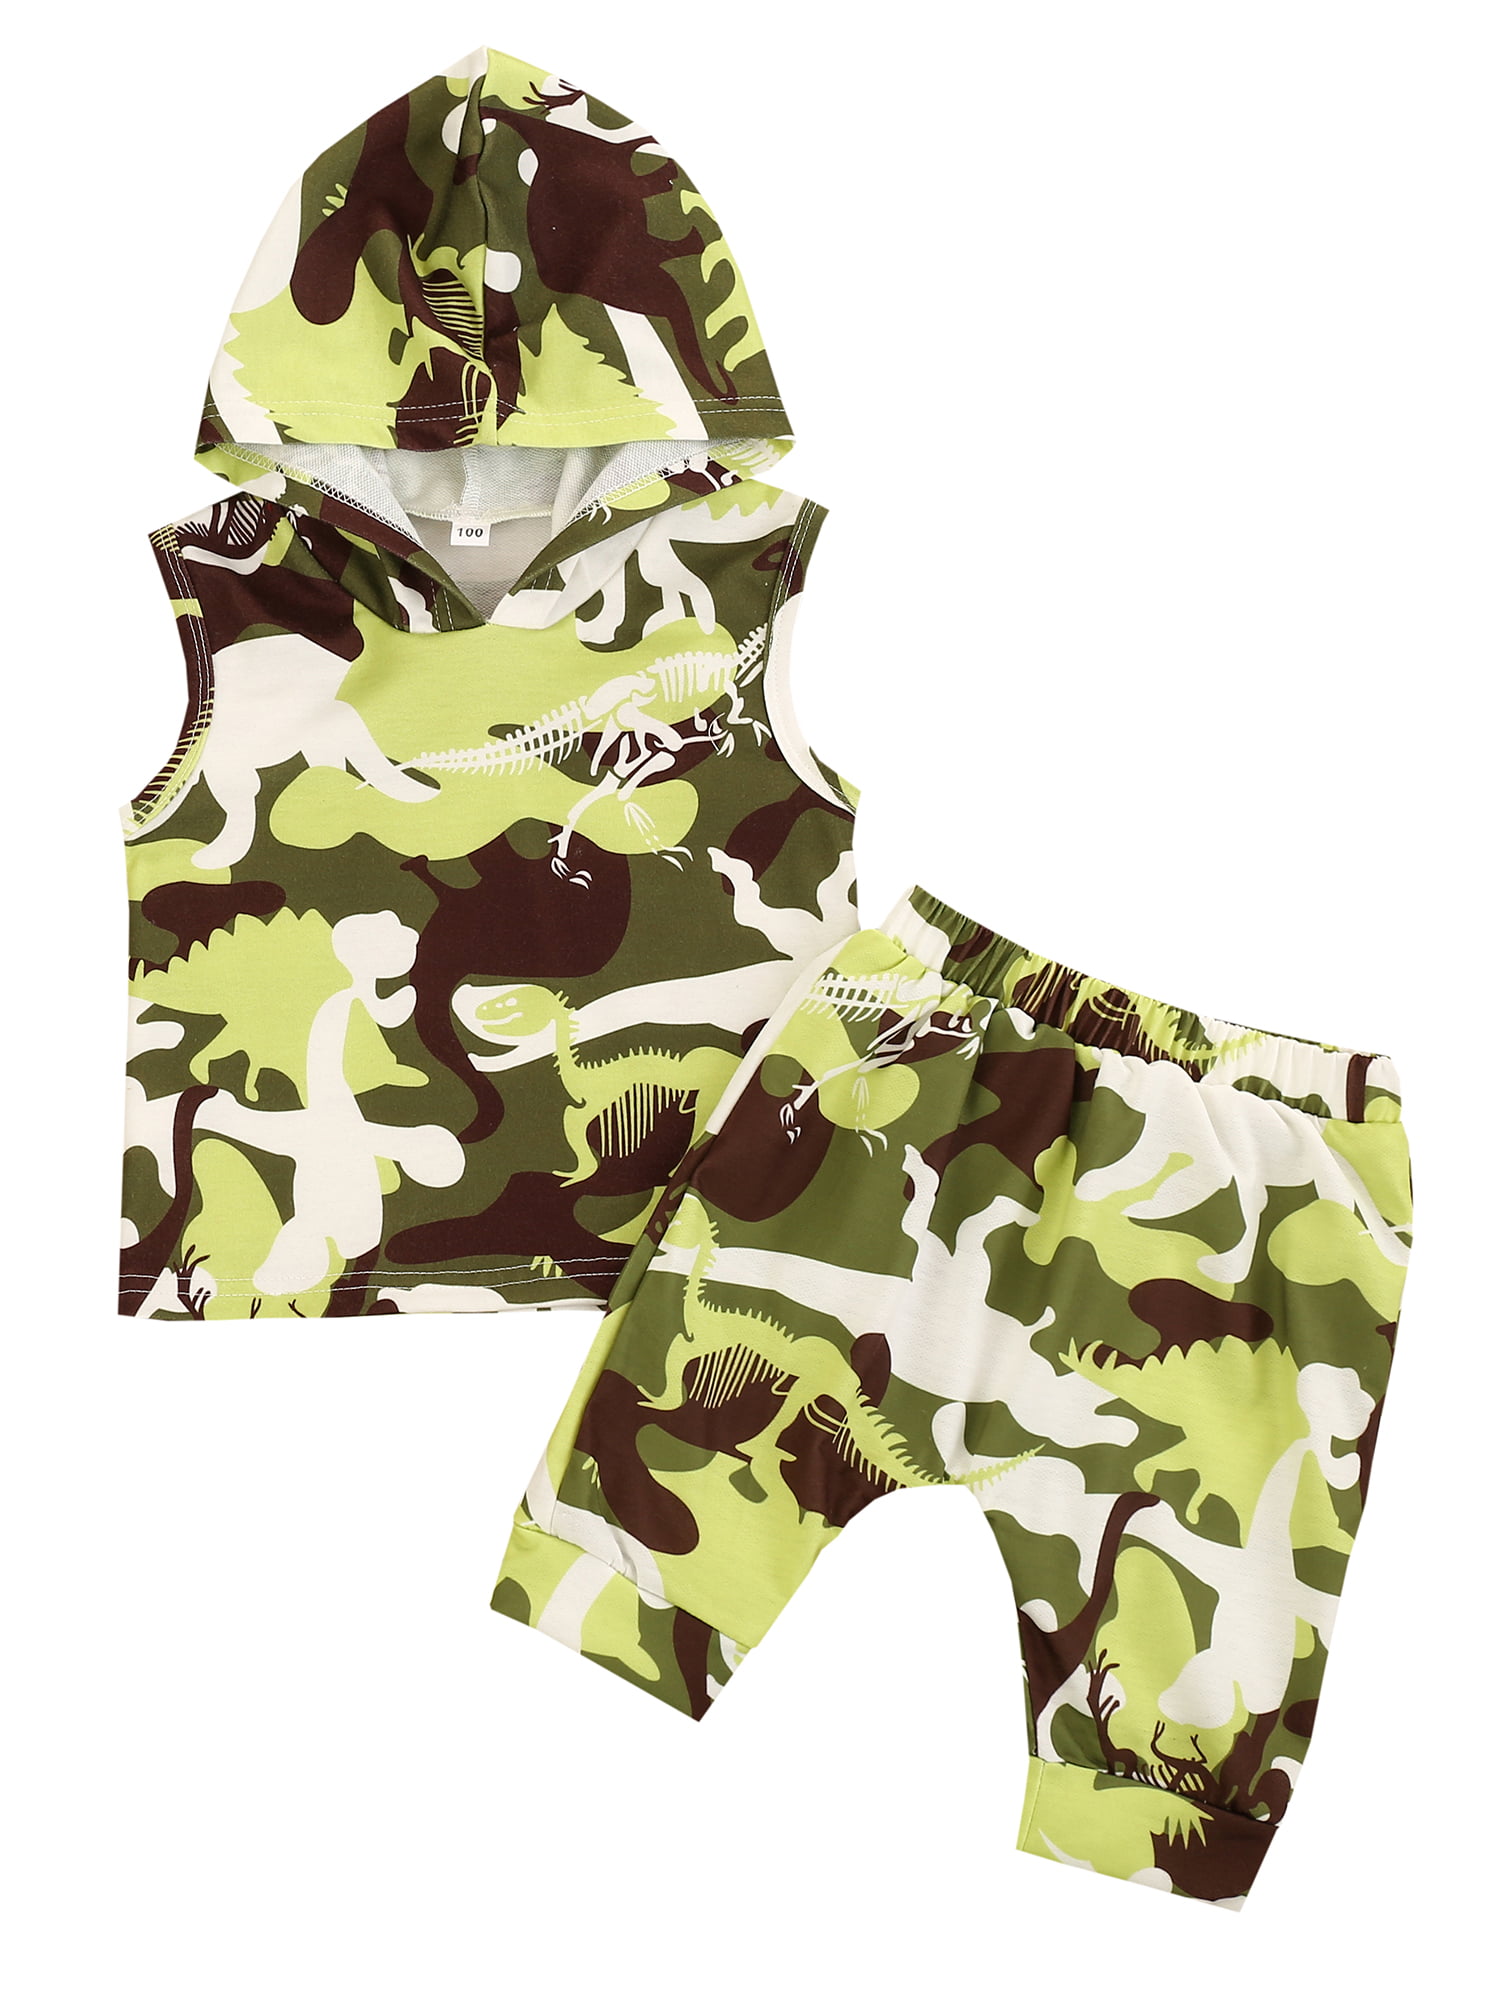 Toddler Unisex Baby Kids Summer Shirts Short Pants Outfit Camouflage Clothes Set 